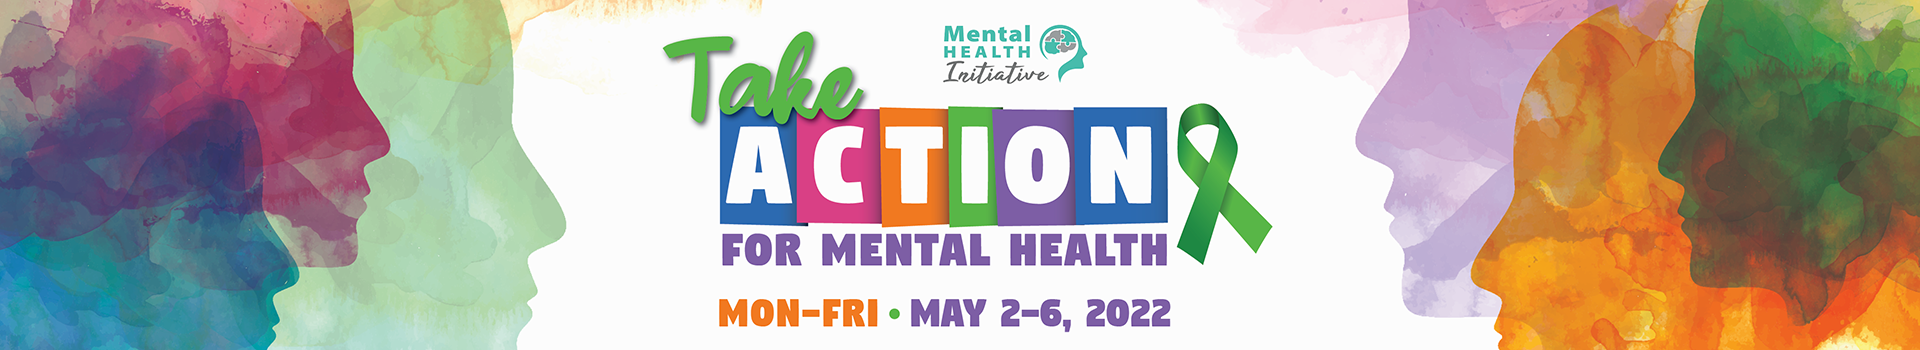 Take Action for Mental Health. Monday through Friday, May 2-6, 2022